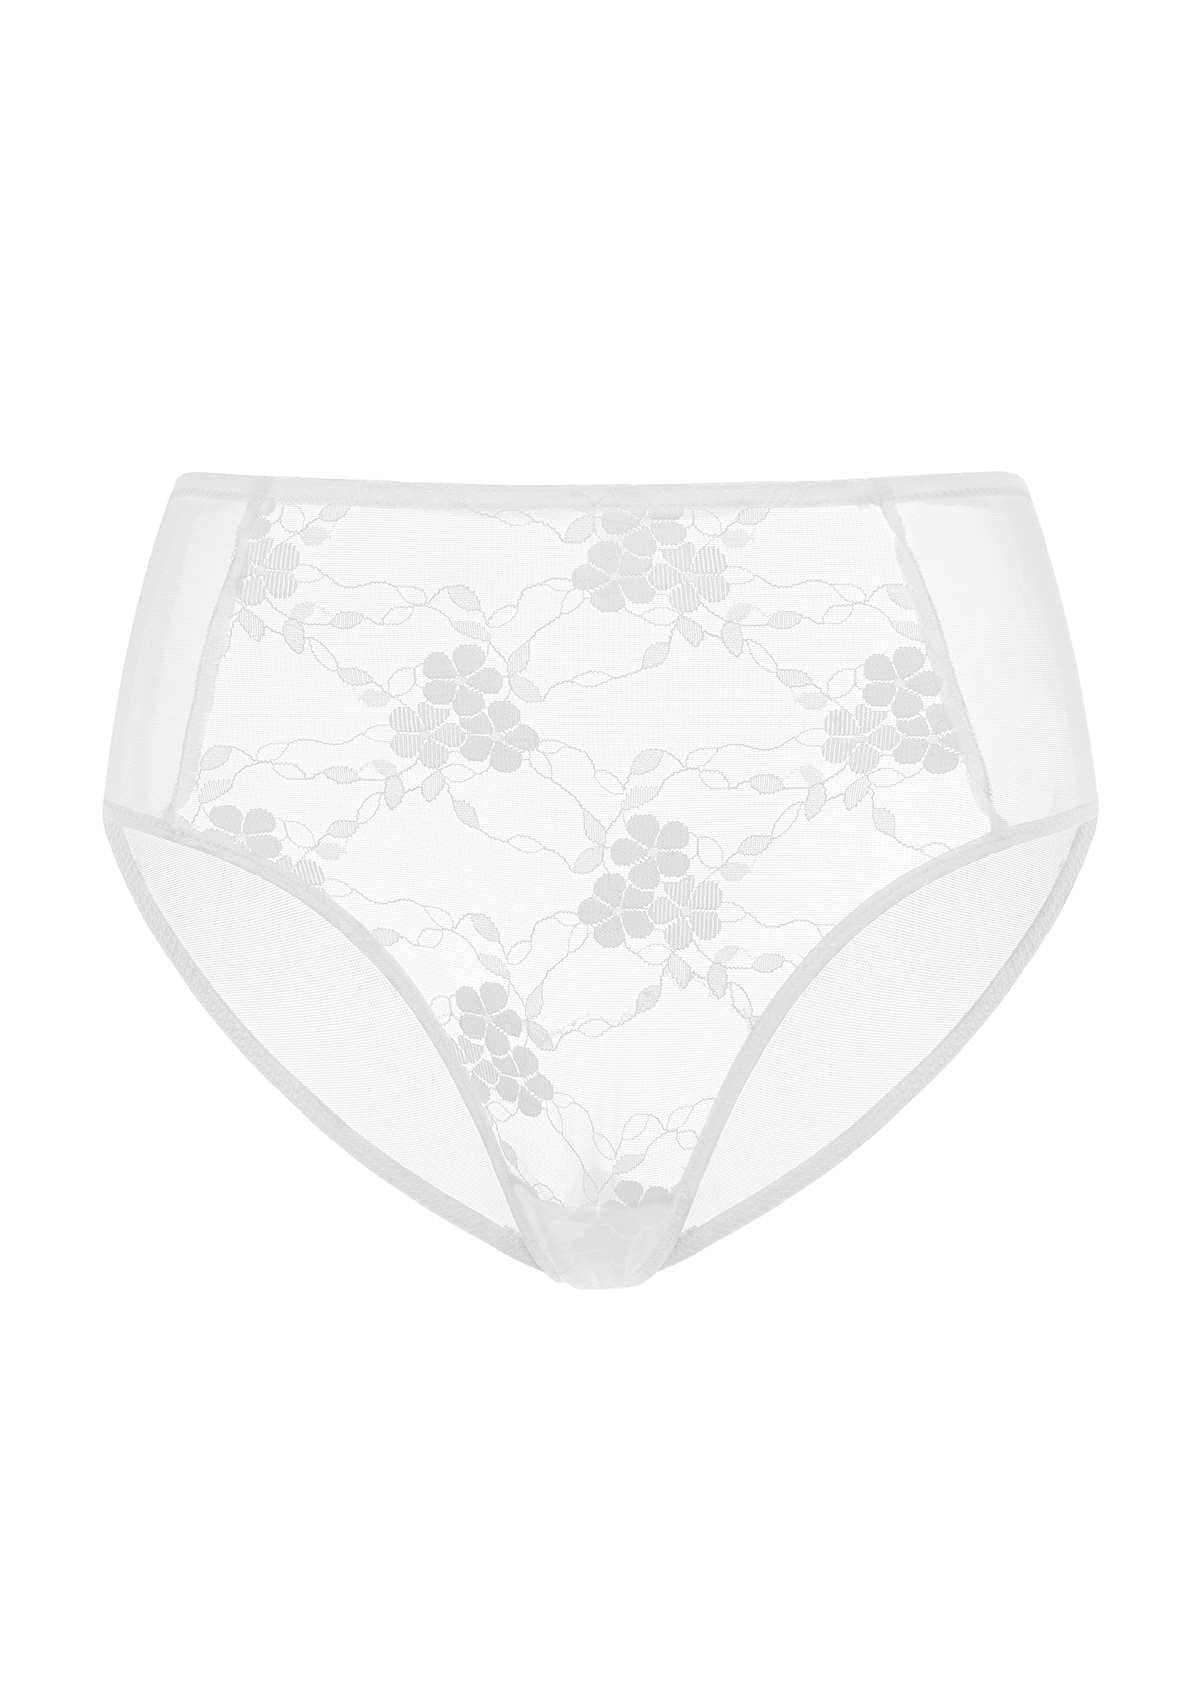 HSIA Spring Romance High-Rise Floral Lacy Panty-Comfort In Style - L / Black